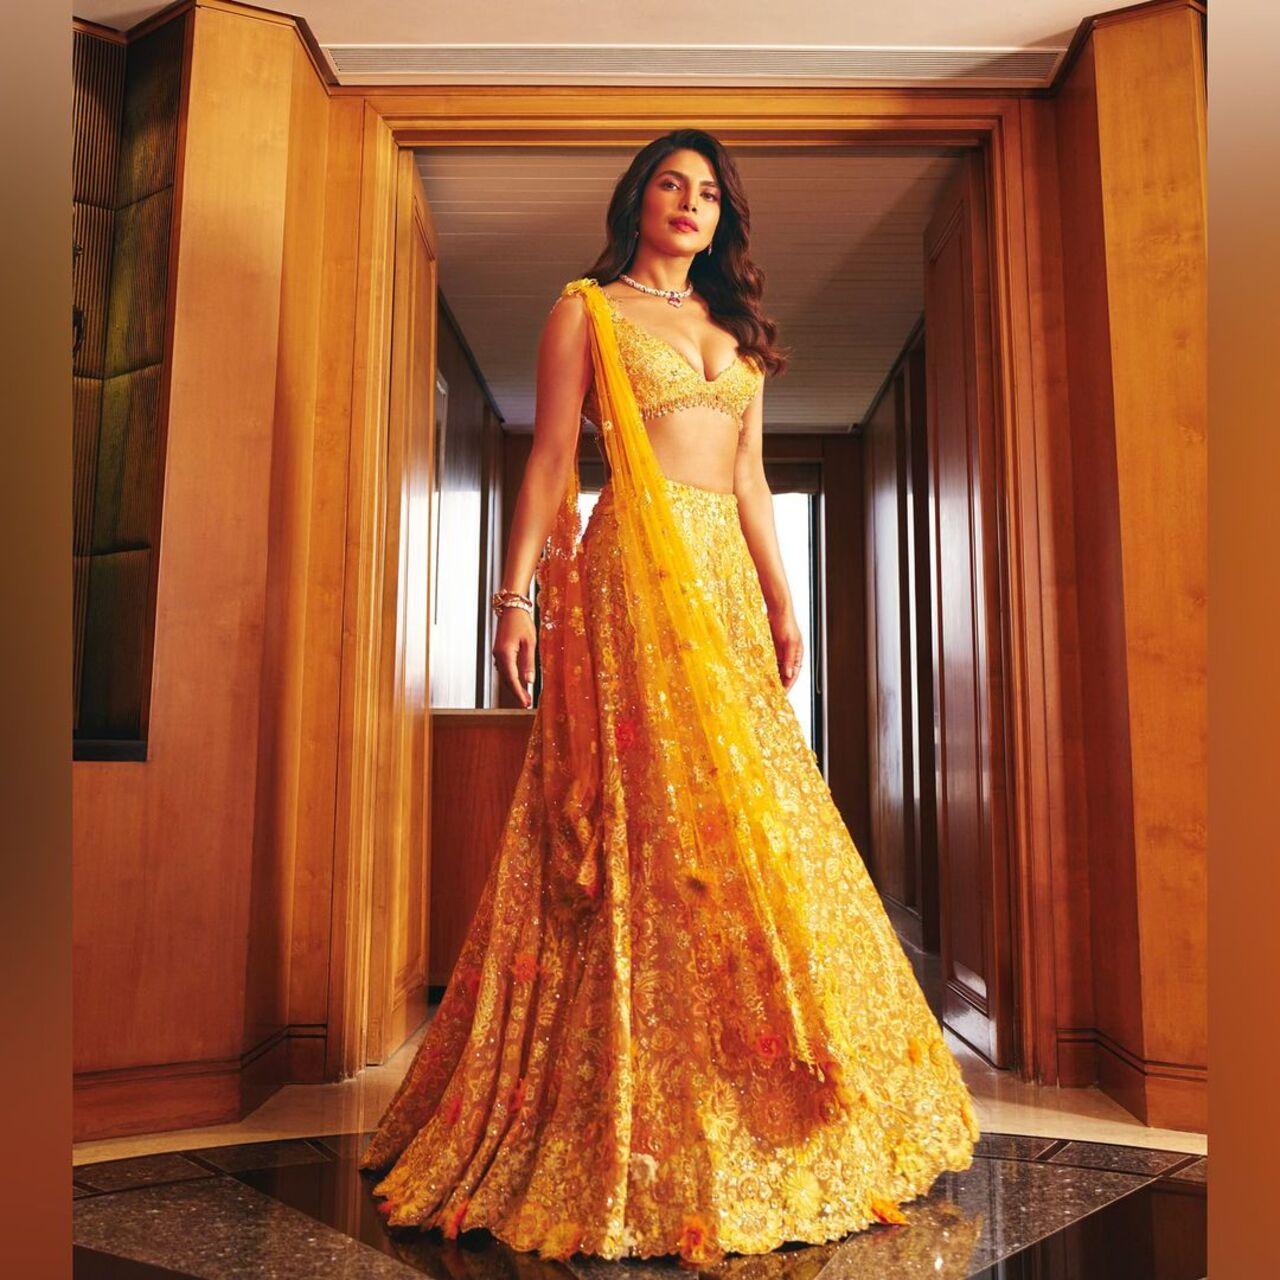 Priyanka stunned in a yellow lehenga paired with a deep V-neck strappy blouse and a stunning matching dupatta